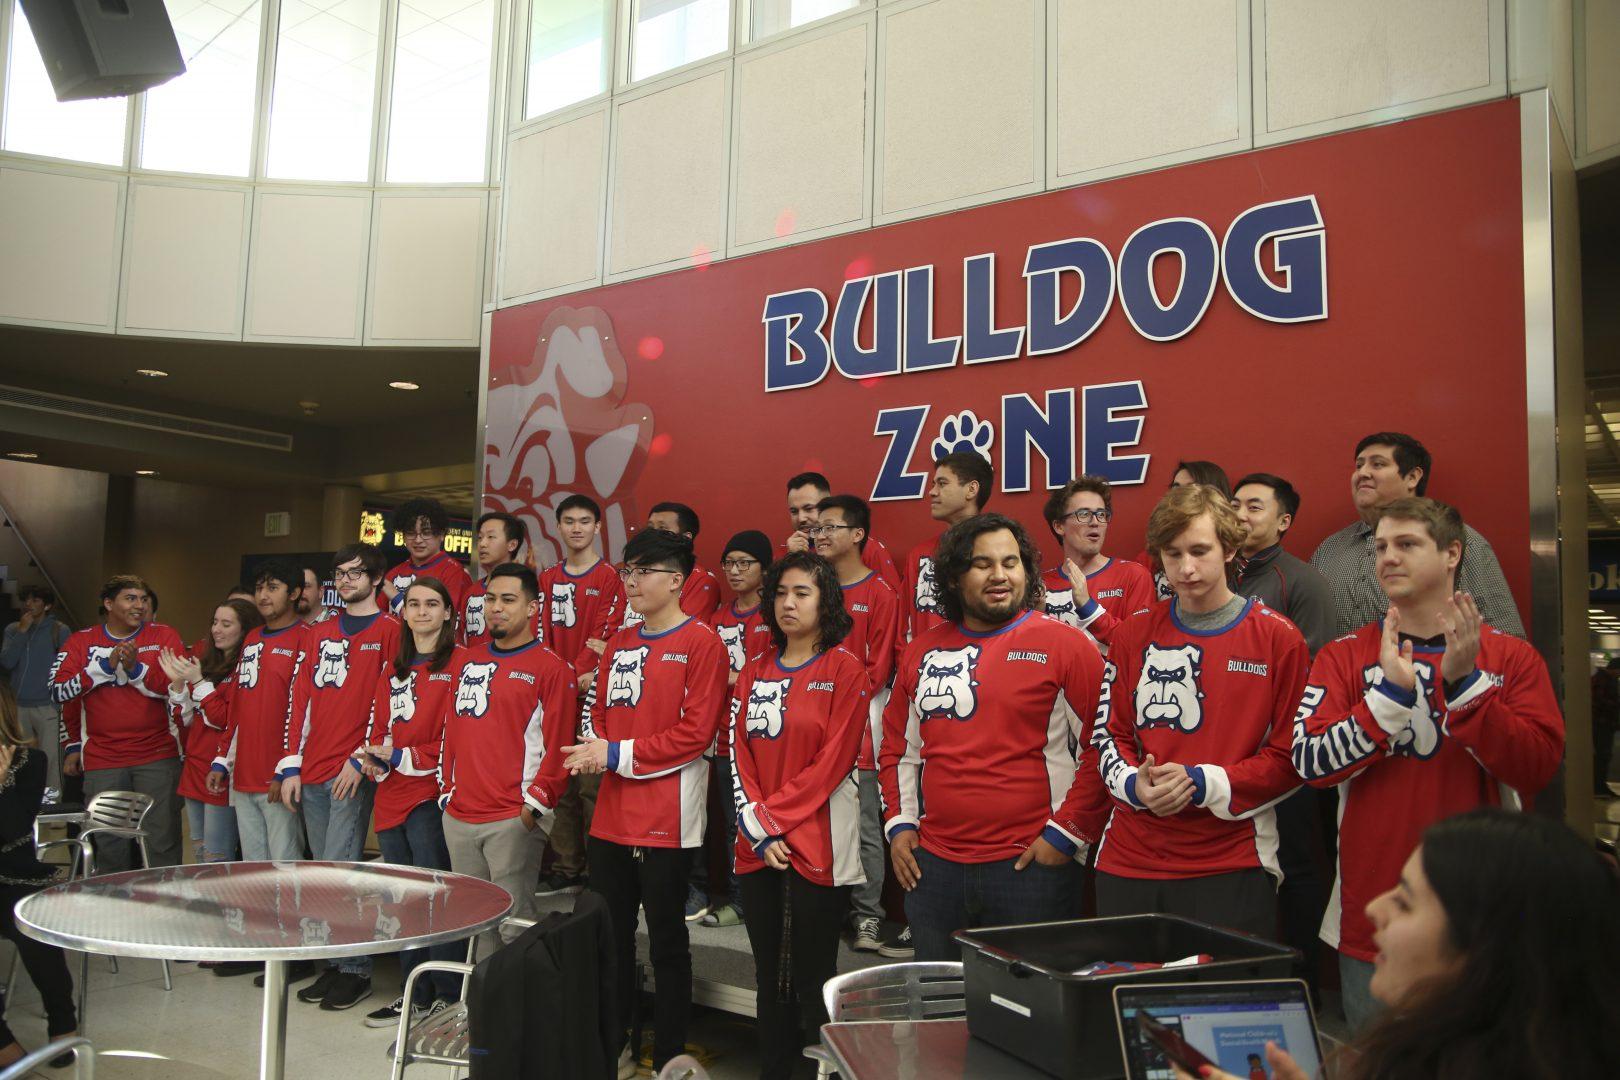 Esports unveiled in a ceremony in the Bulldog Zone in the USU on Monday, Feb. 3, 2020. (Larry Valenzuela/The Collegian)